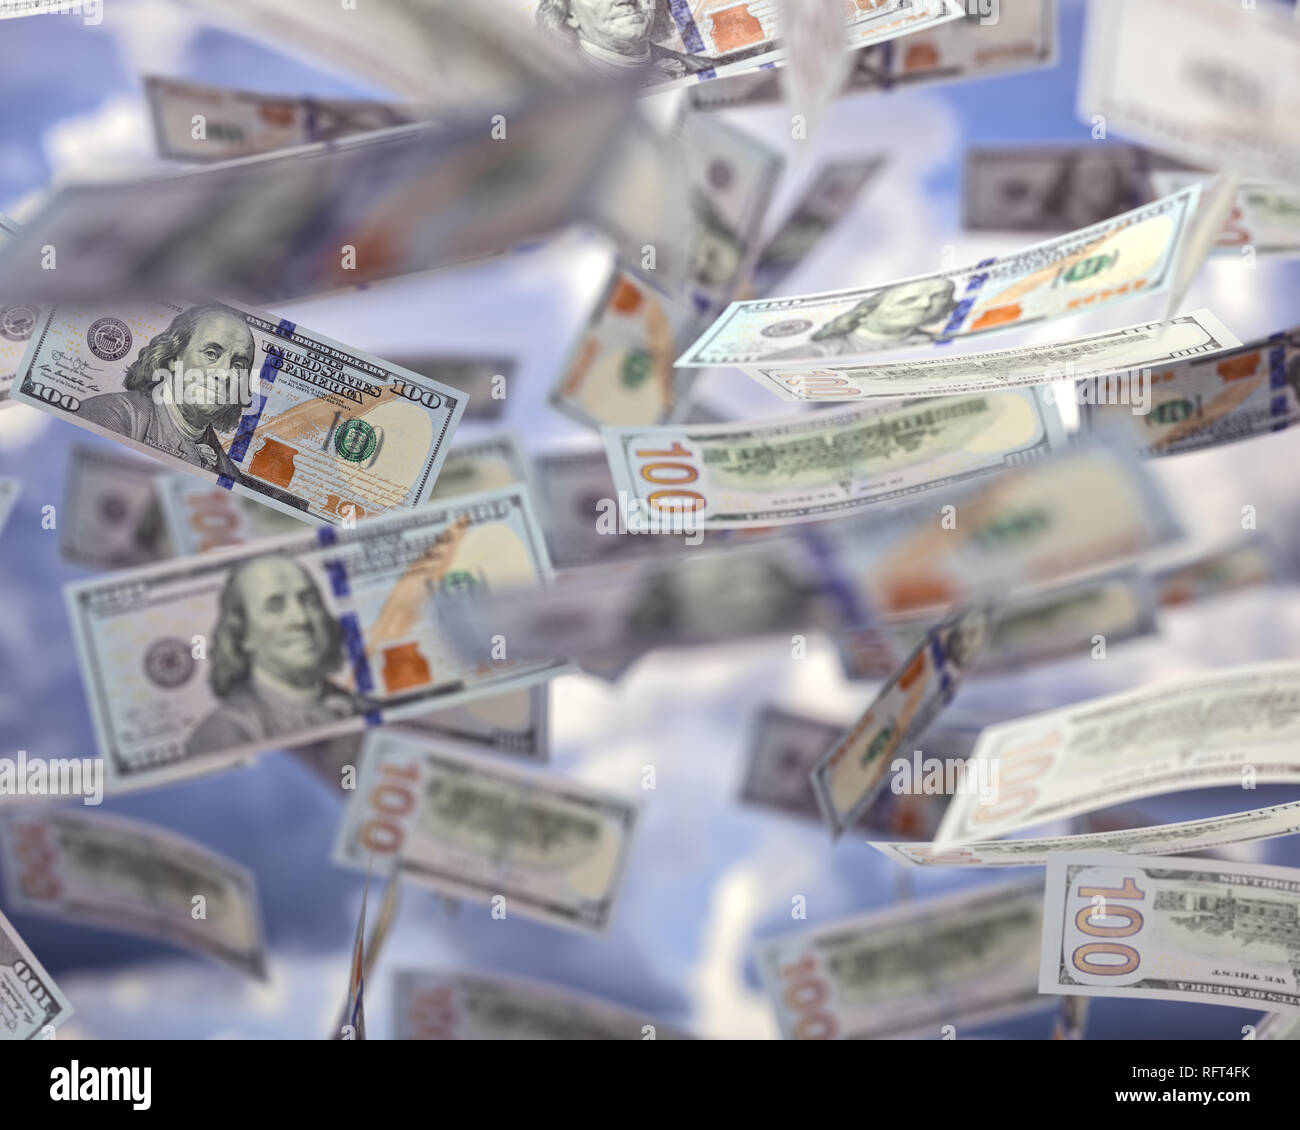 Raining money from the sky, American dollar bills falling everywhere. Concept of wealth, making easy money, without difficulty. Stock Photo